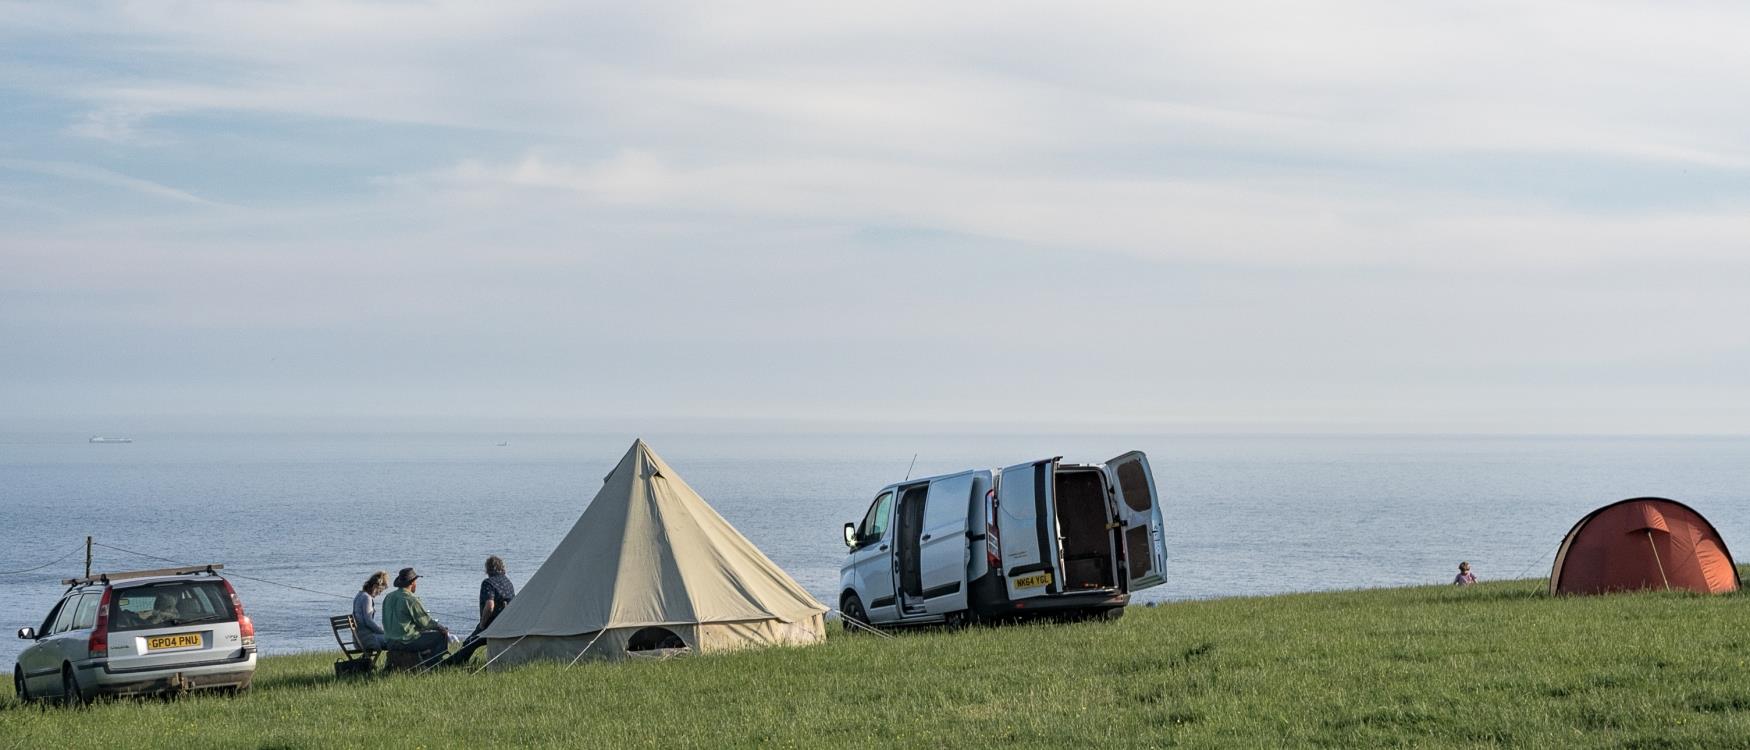 camping overlooking the sea